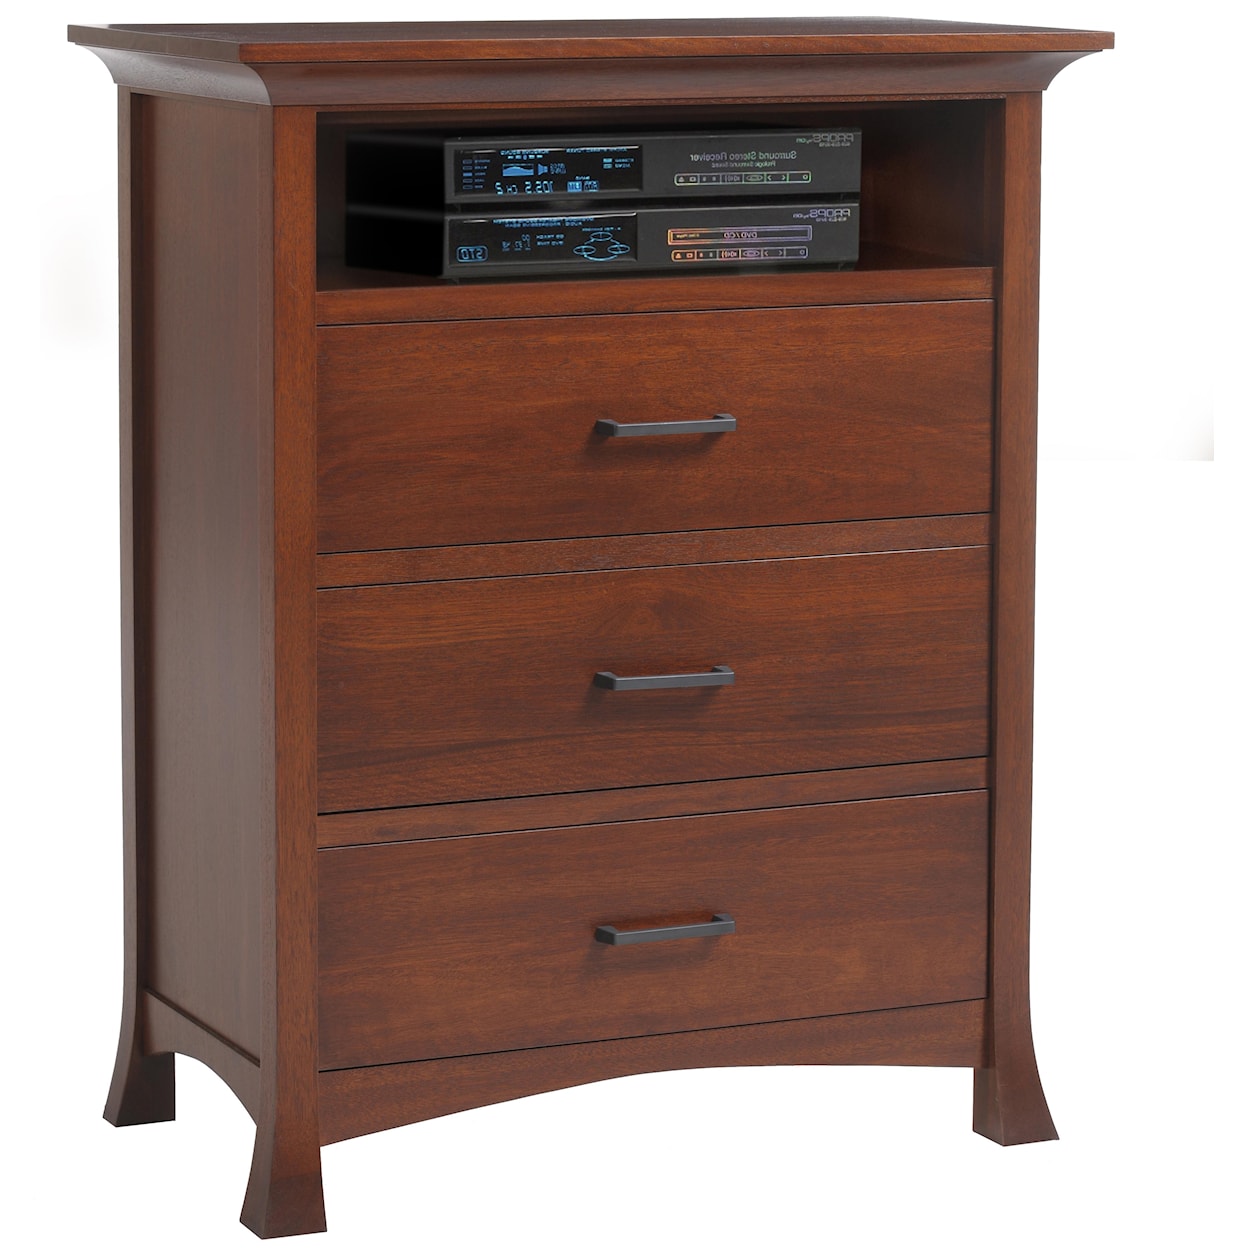 Millcraft Oasis Media Chest